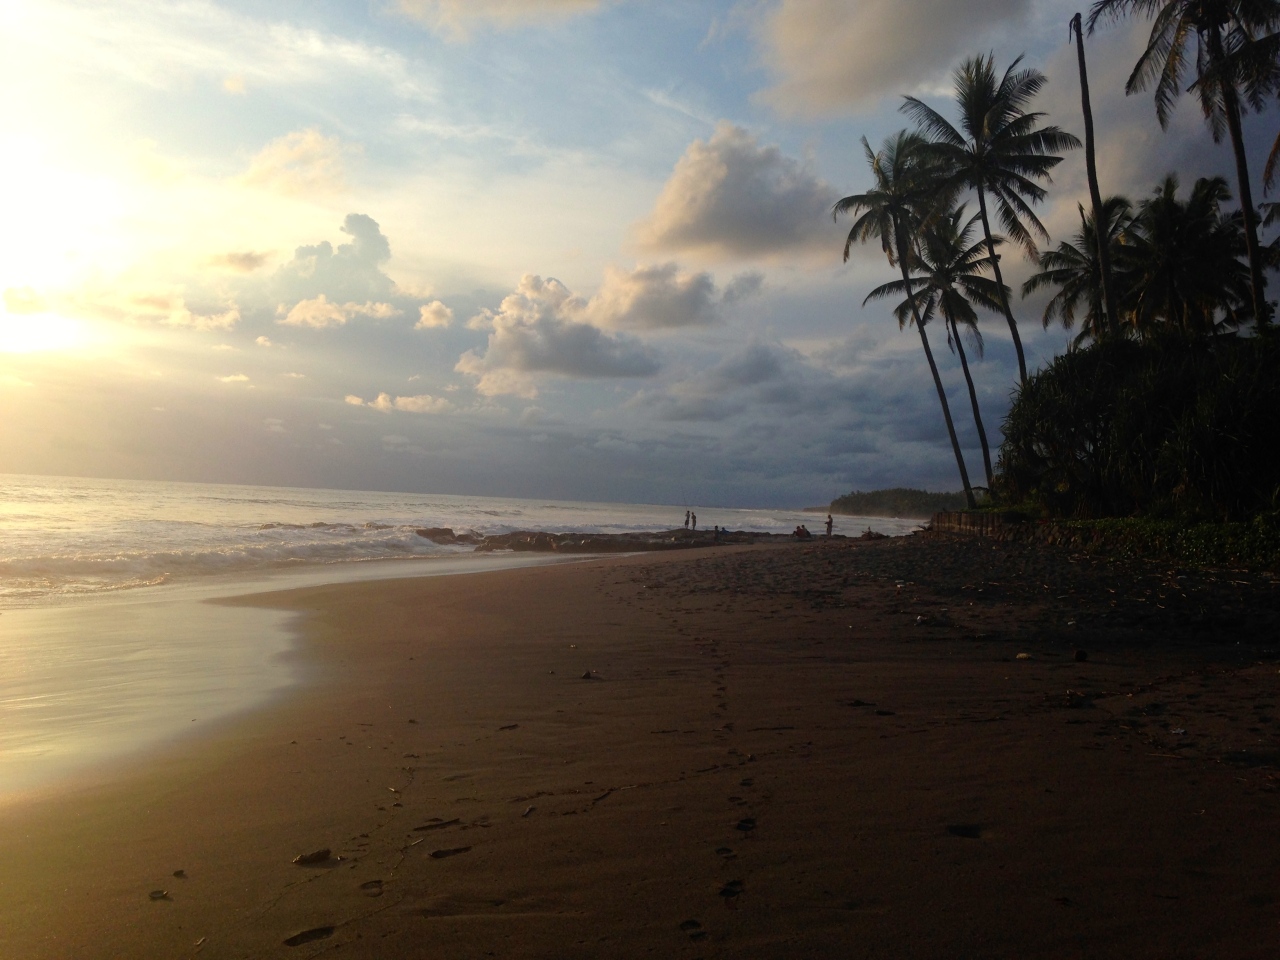 The Bali Diary: Dolphins at Sunrise